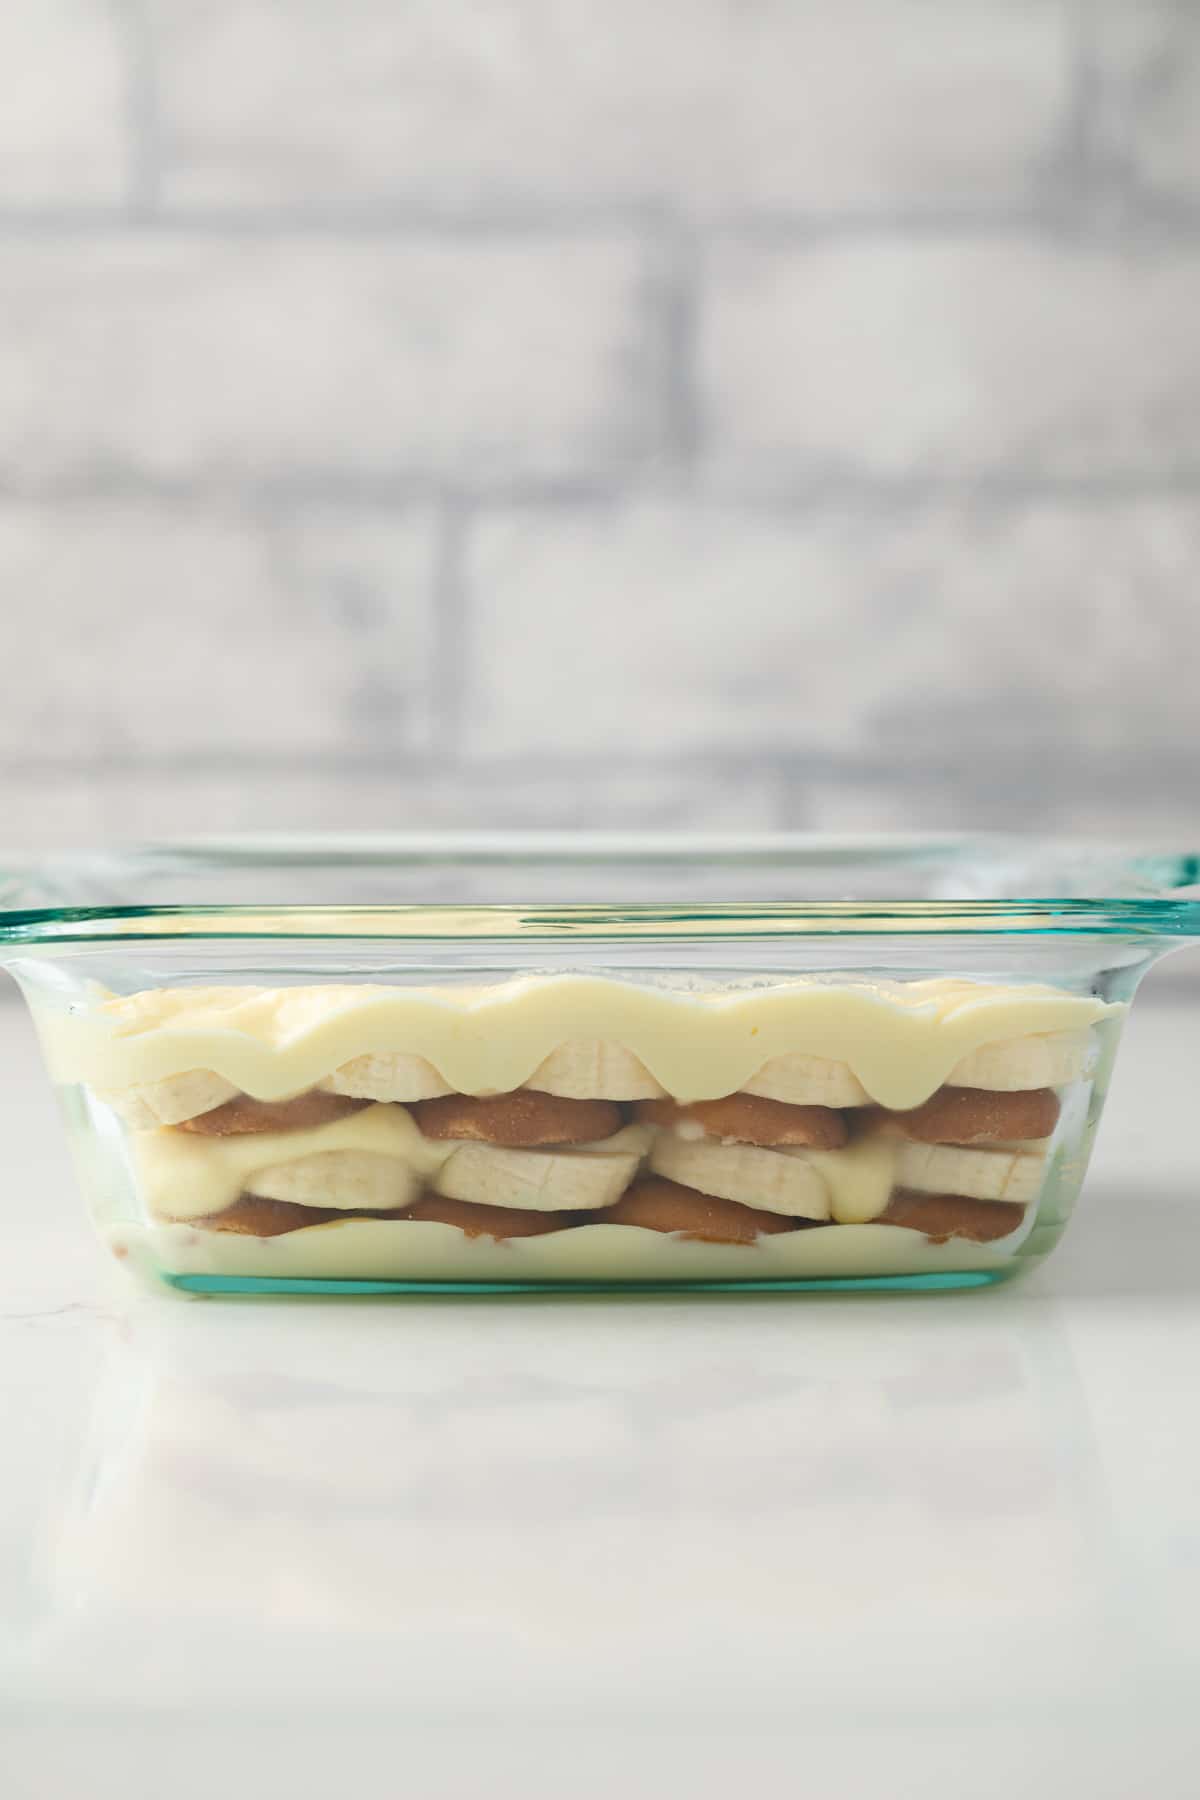 Side view of banana pudding in a glass dish.